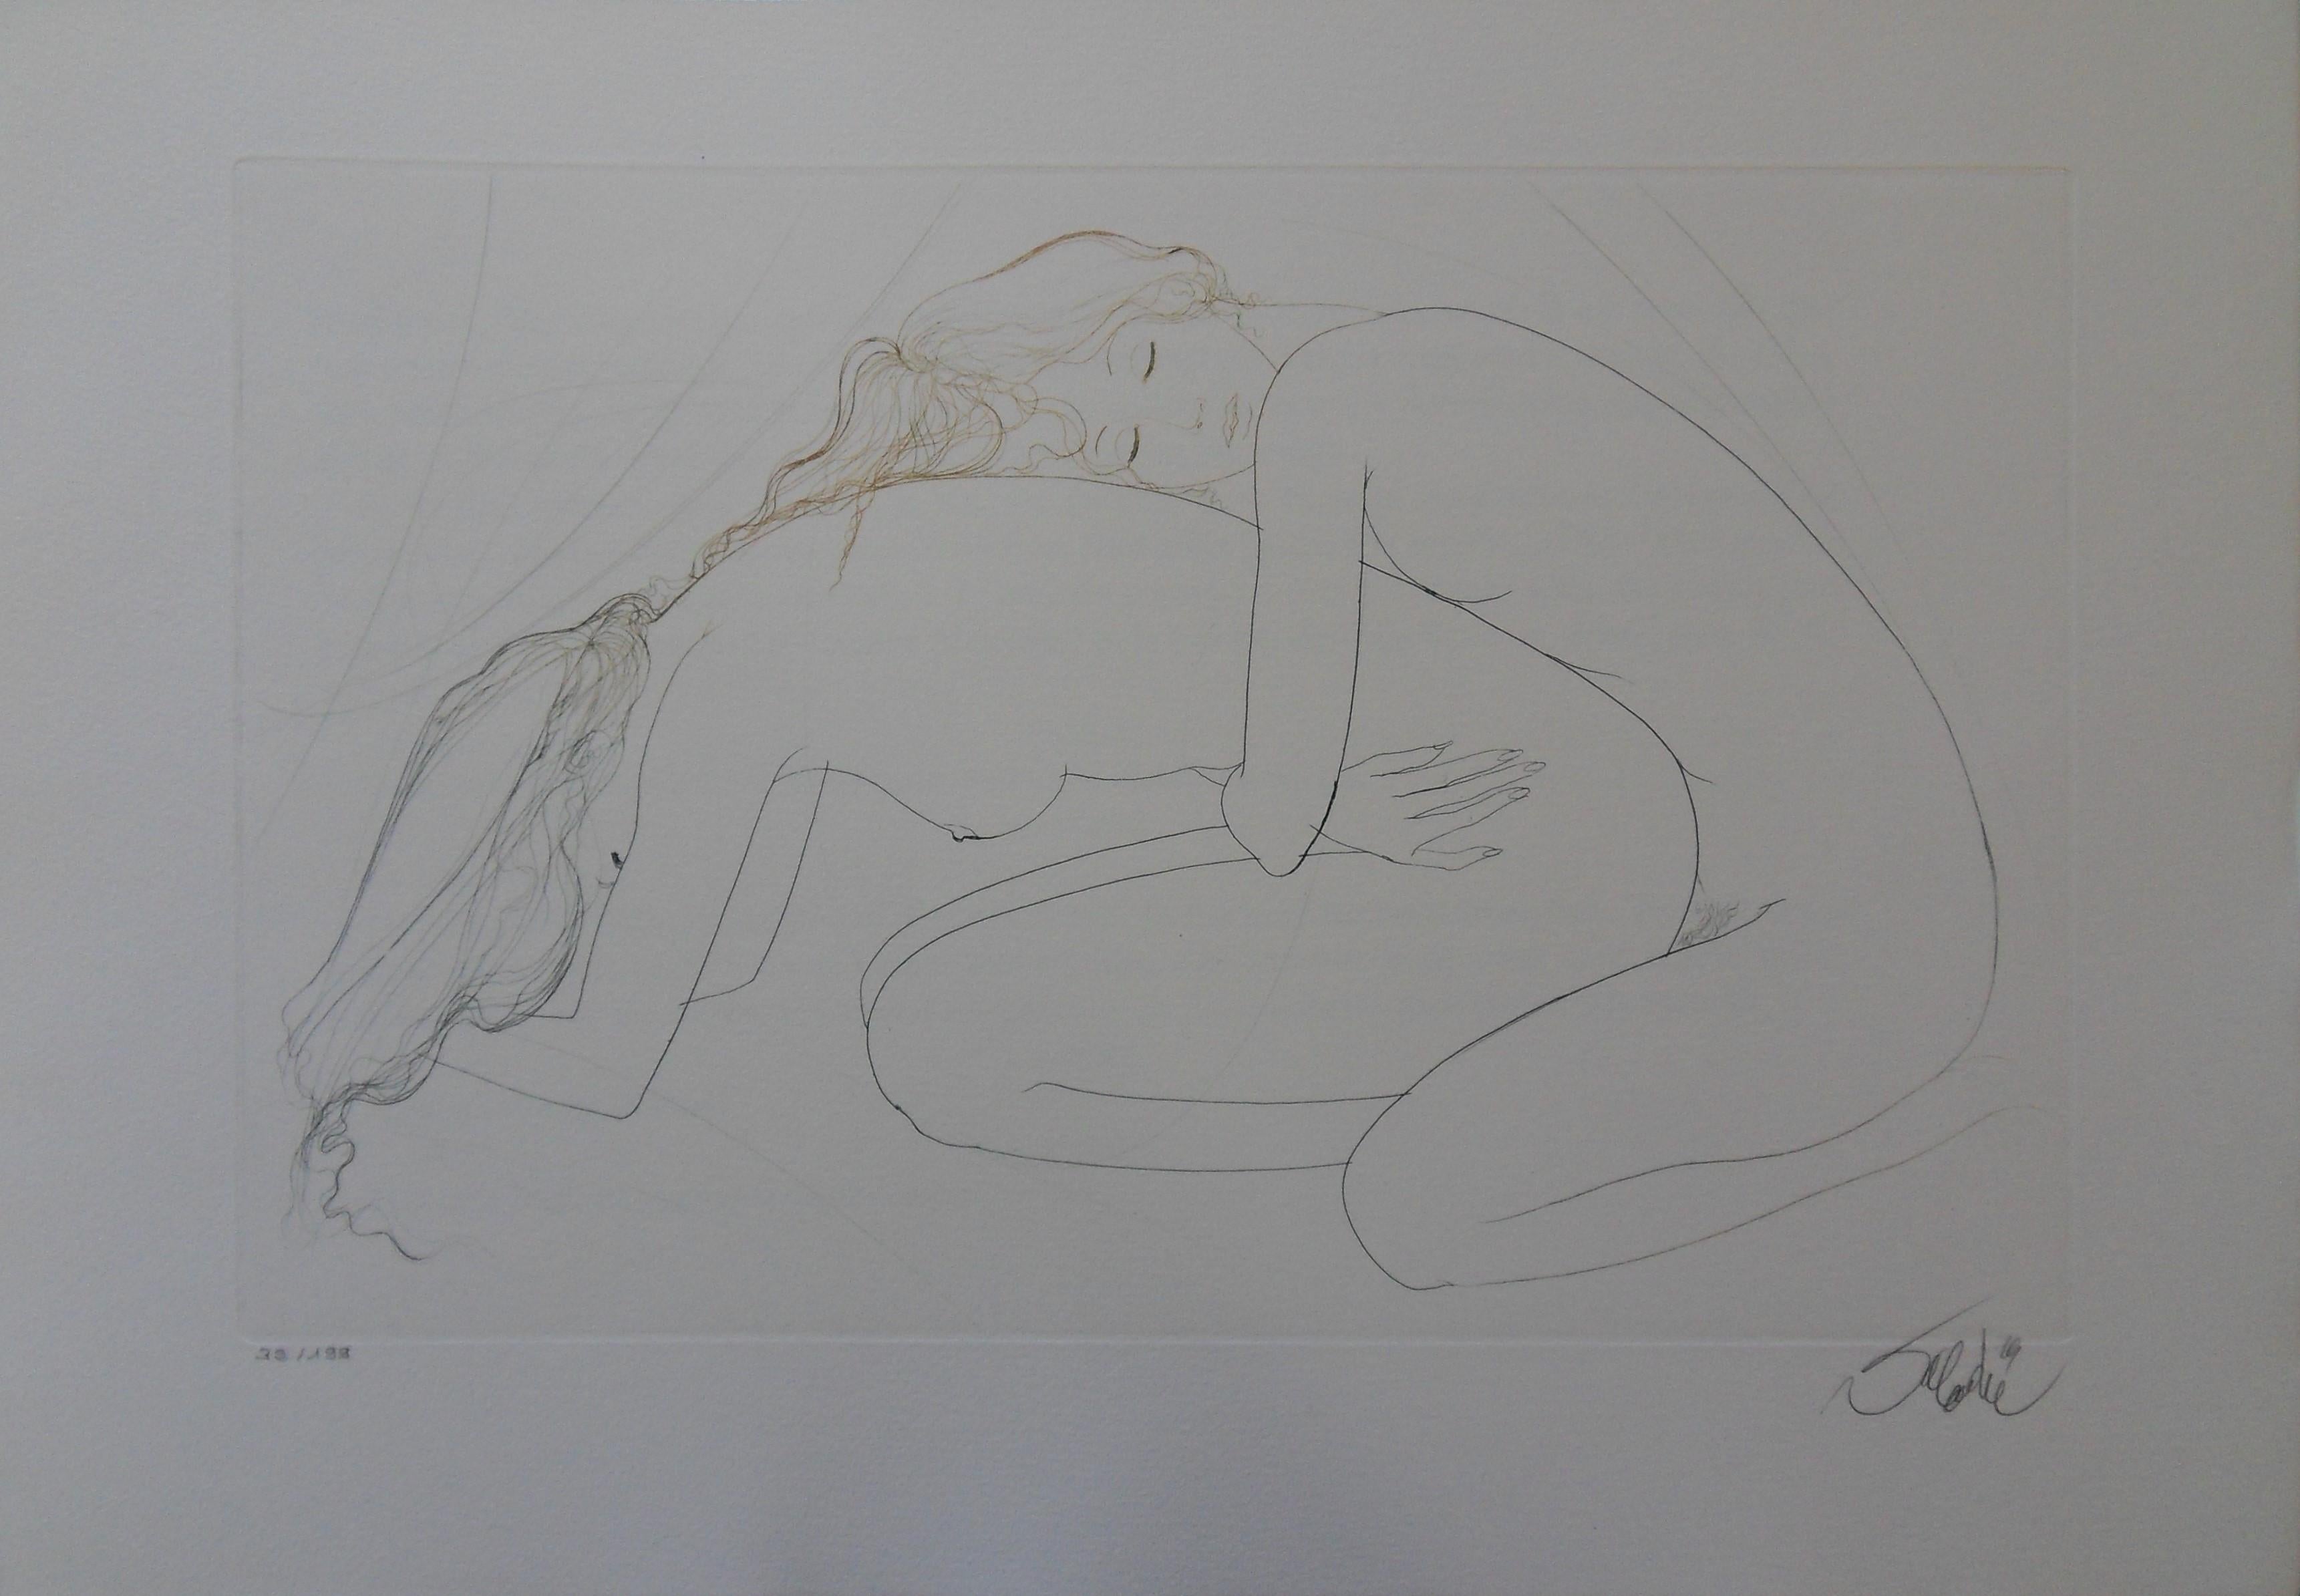 Two Nudes in the Egg Position - Original handsigned etching